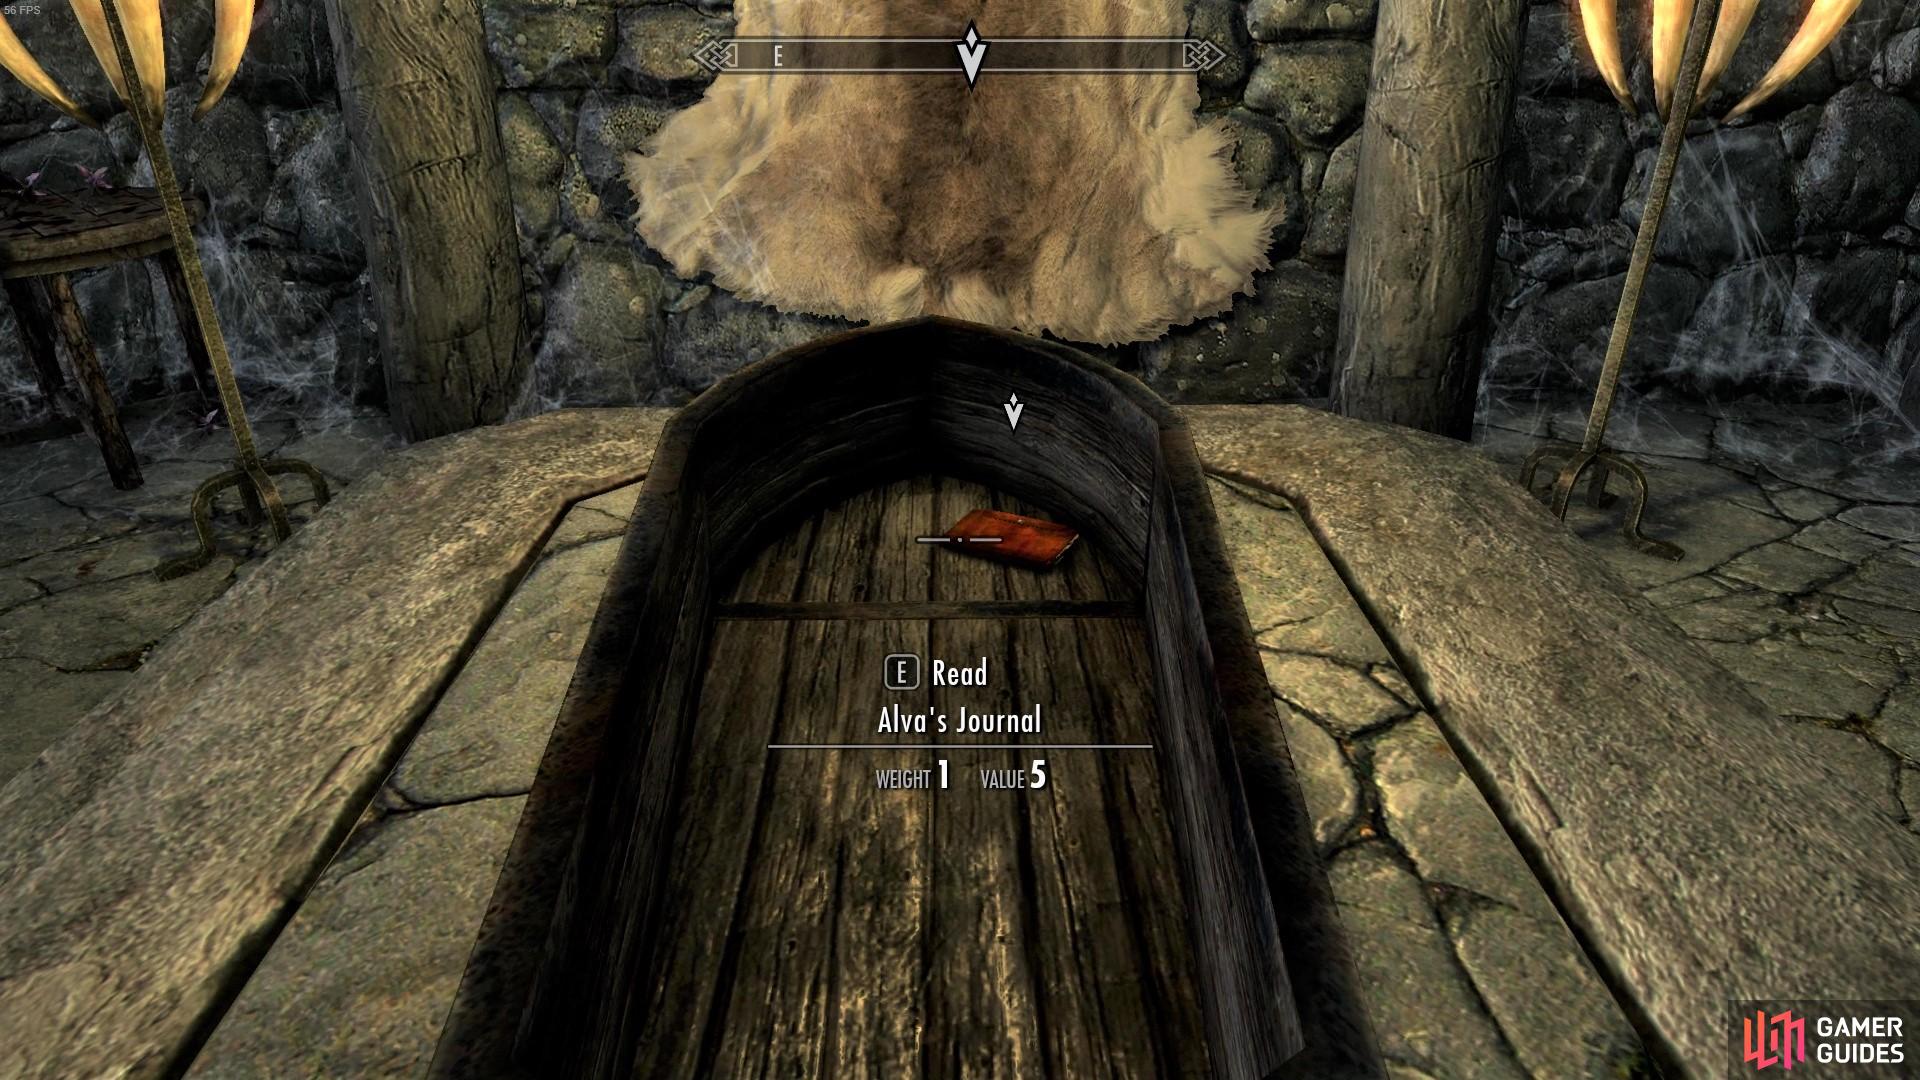 Alva's journal can be found in her coffin in the basement.